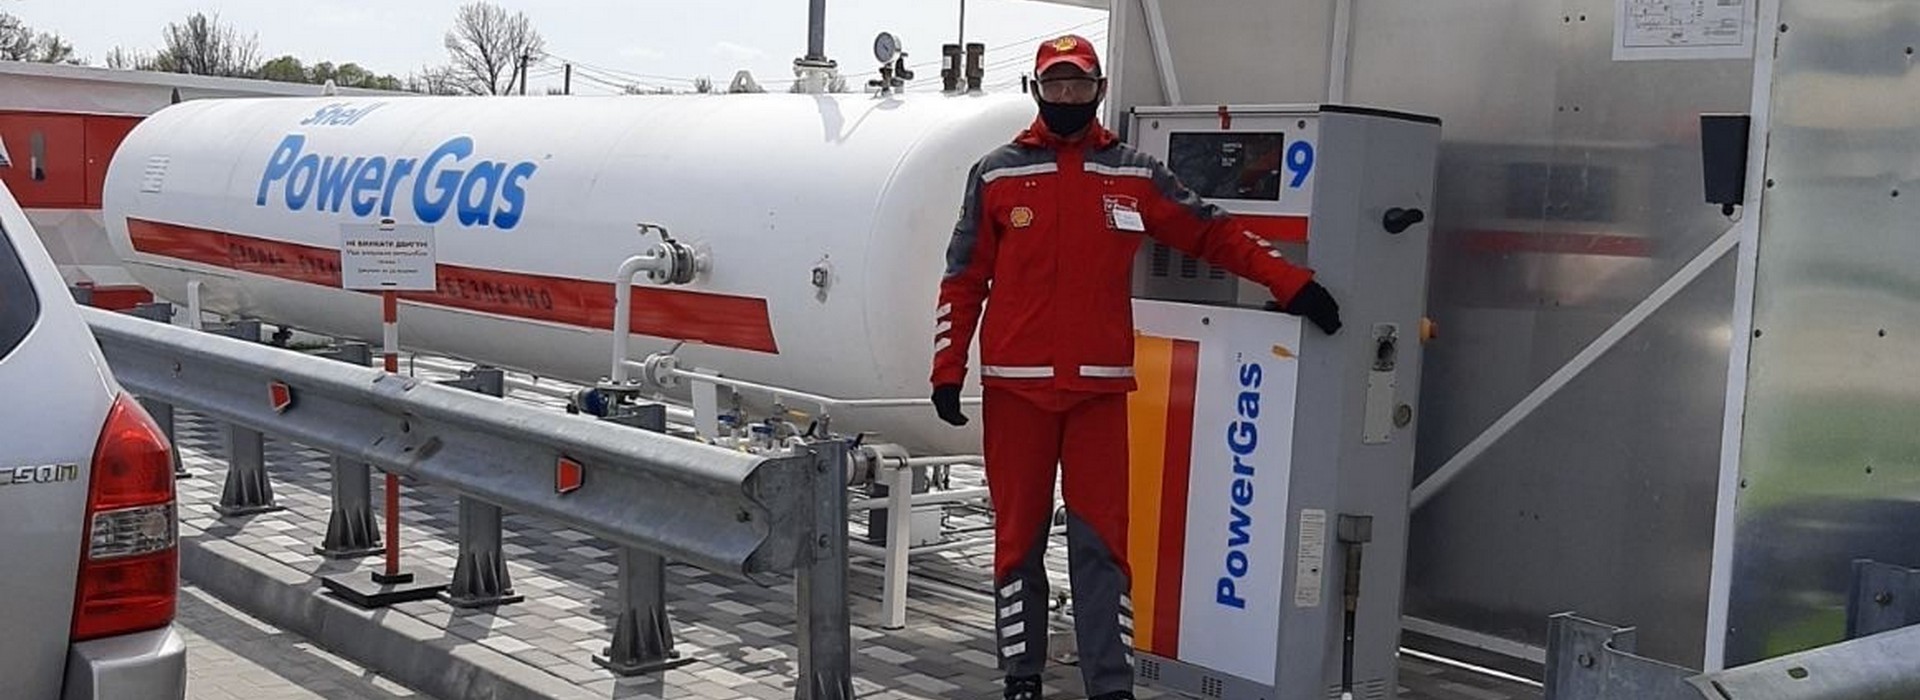 Shell Celebrates Its Safety Day Globally and in Ukraine